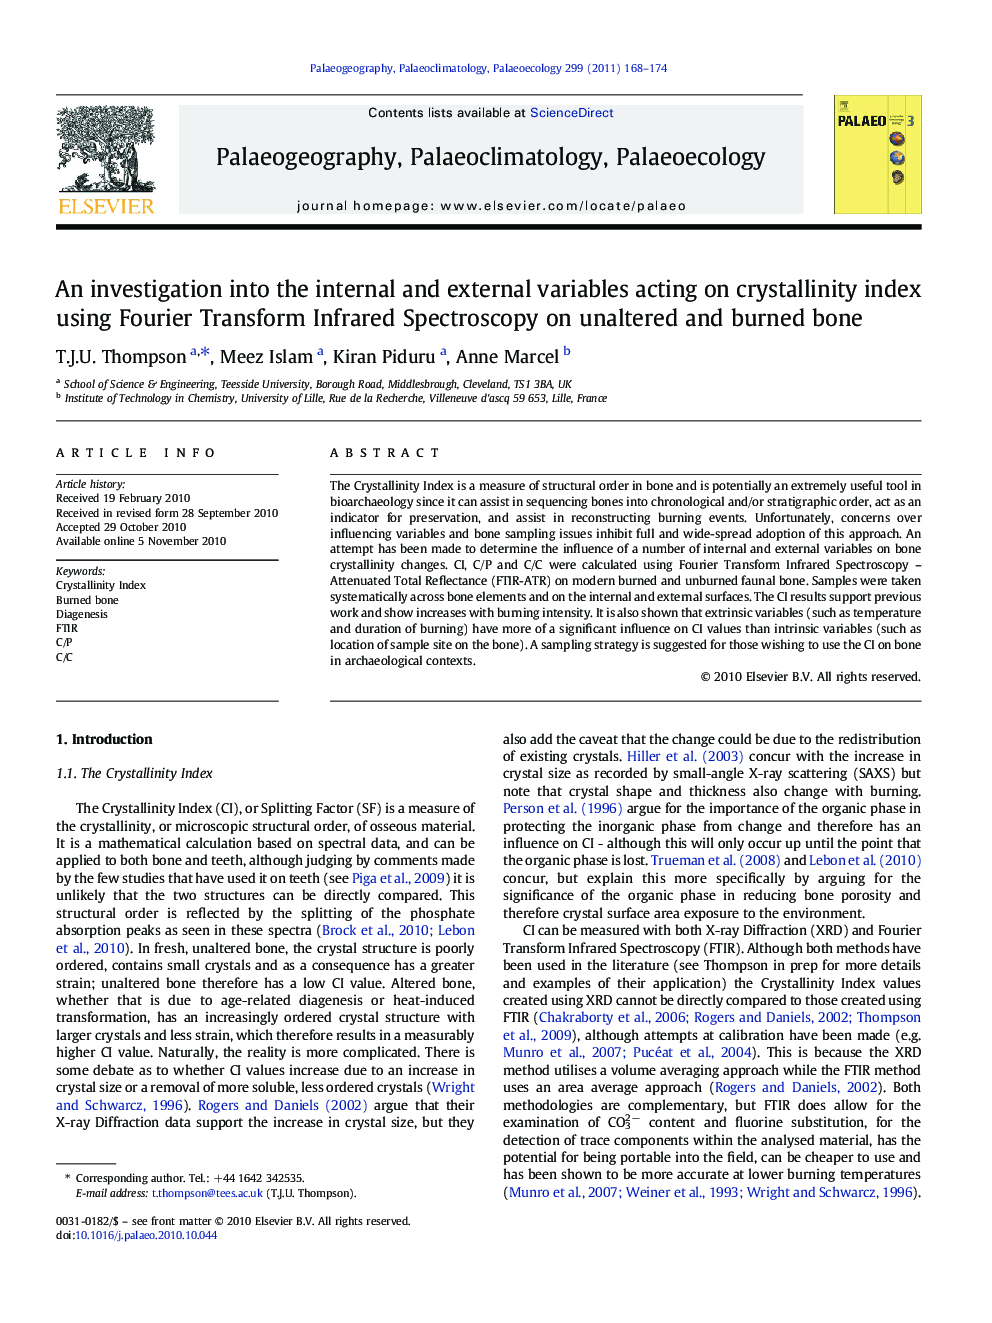 An investigation into the internal and external variables acting on crystallinity index using Fourier Transform Infrared Spectroscopy on unaltered and burned bone